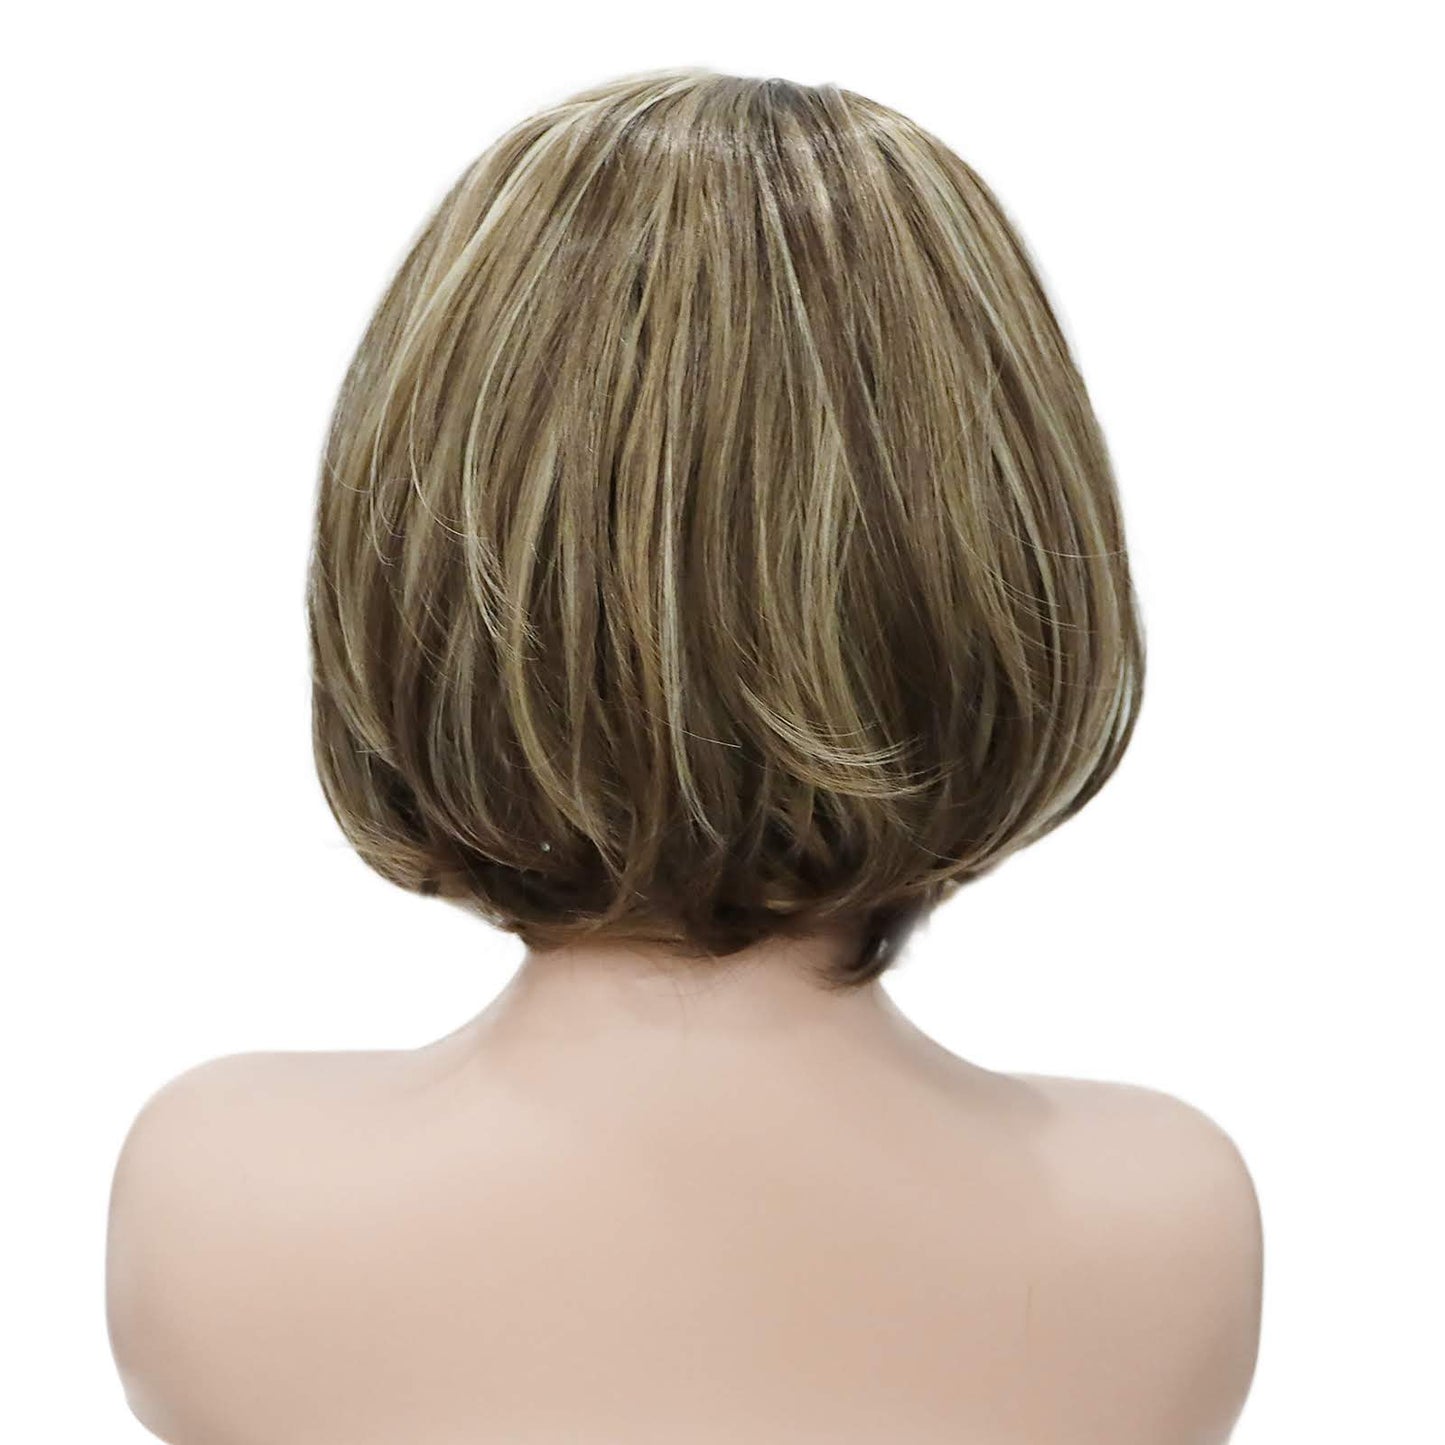 Brown & Blonde Butterfly Bob Lace Front Wig. Abigail